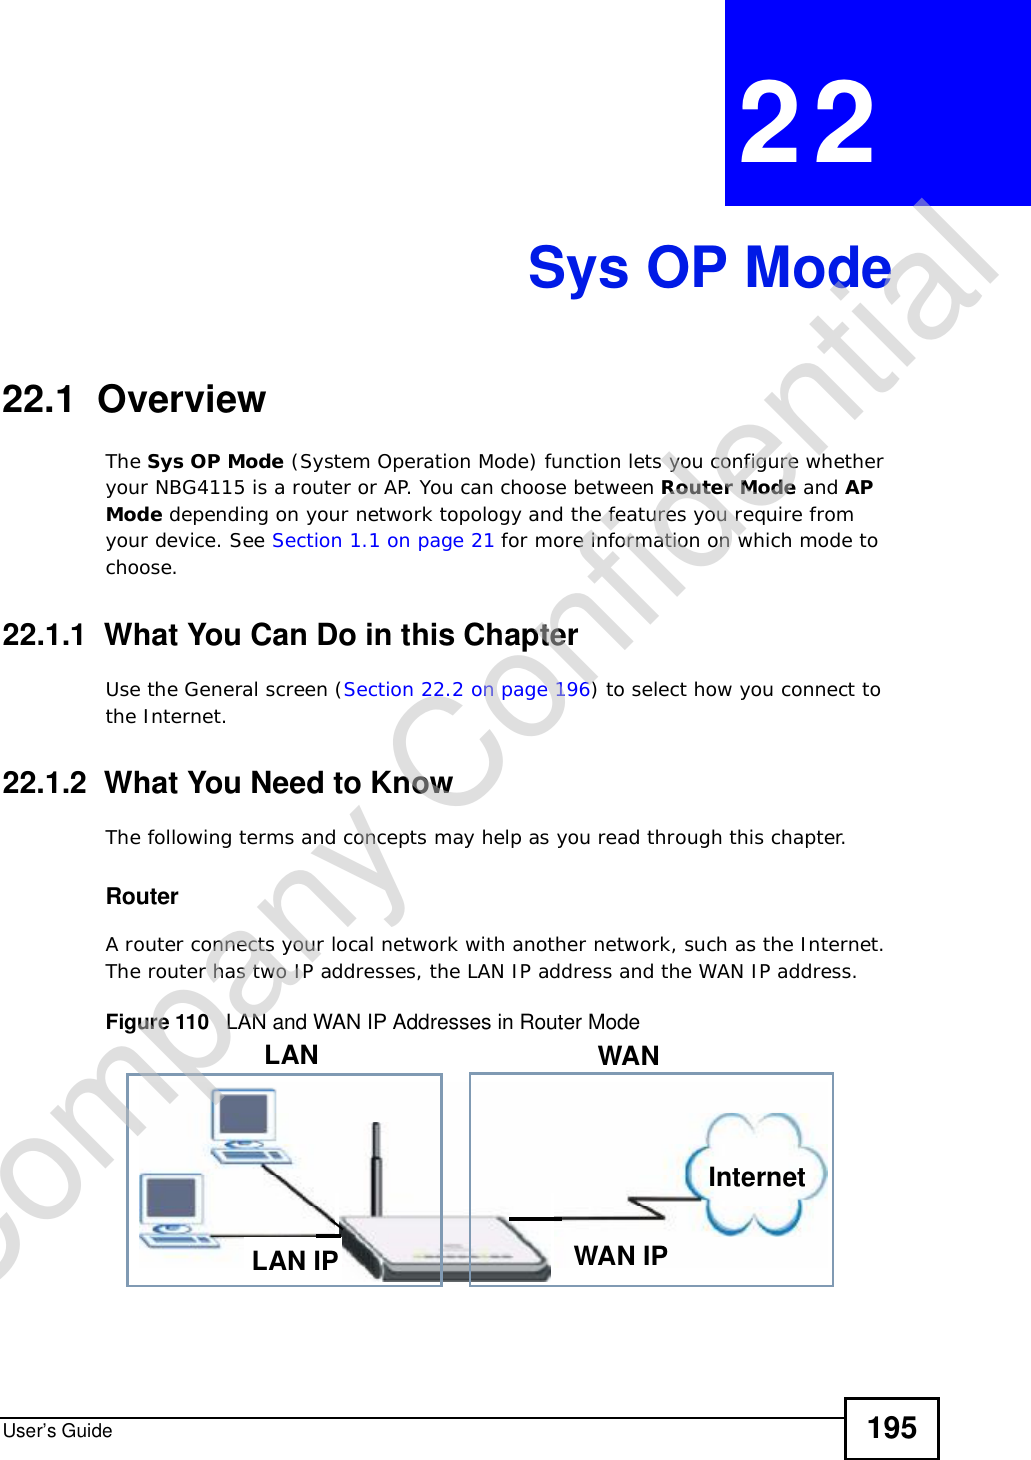 User’s Guide 195CHAPTER 22Sys OP Mode22.1  OverviewThe Sys OP Mode (System Operation Mode) function lets you configure whether your NBG4115 is a router or AP. You can choose between Router Mode and APMode depending on your network topology and the features you require from your device. See Section 1.1 on page 21 for more information on which mode to choose.22.1.1  What You Can Do in this ChapterUse the General screen (Section 22.2 on page 196) to select how you connect to the Internet. 22.1.2  What You Need to KnowThe following terms and concepts may help as you read through this chapter.RouterA router connects your local network with another network, such as the Internet. The router has two IP addresses, the LAN IP address and the WAN IP address.Figure 110   LAN and WAN IP Addresses in Router ModeWAN IPInternetLAN WANLAN IPCompany Confidential